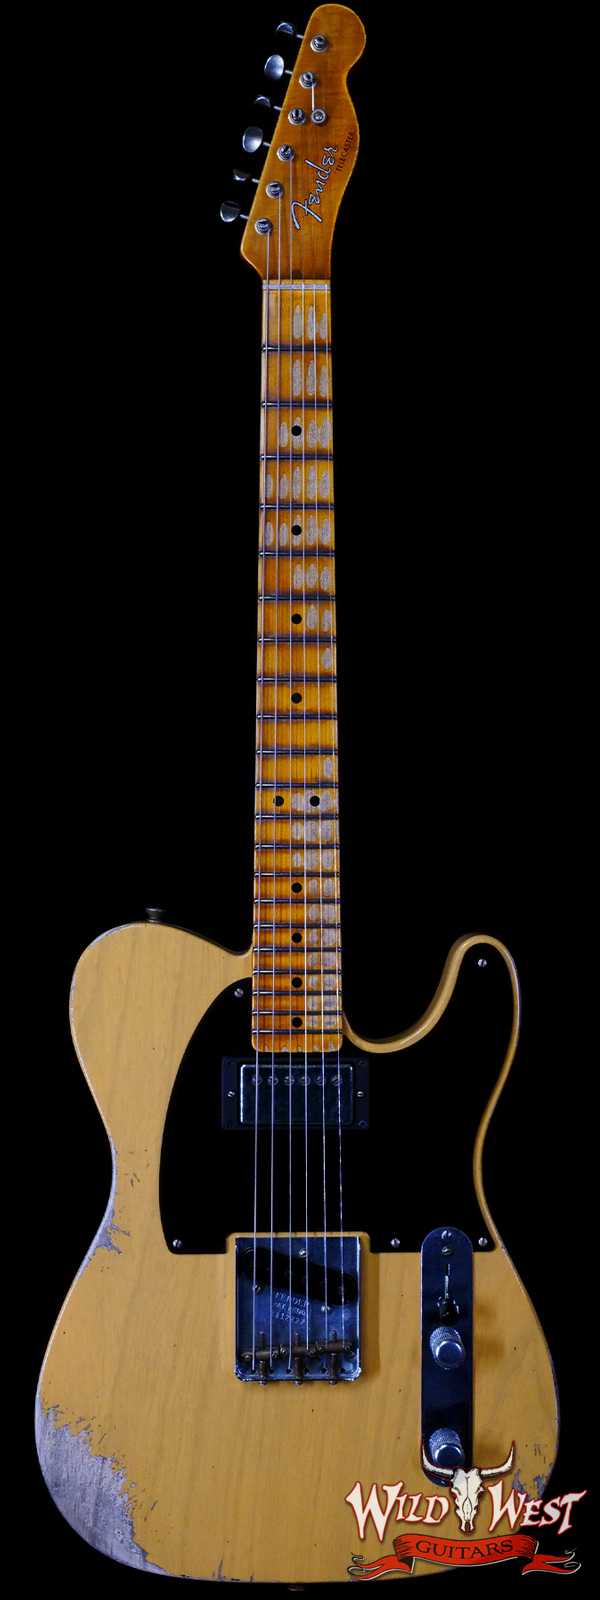 Fender Custom Shop Limited Edition 1951 Telecaster HS Hand-Wound Pickup Heavy Relic  Aged Butterscotch Blonde 6.95 Pounds